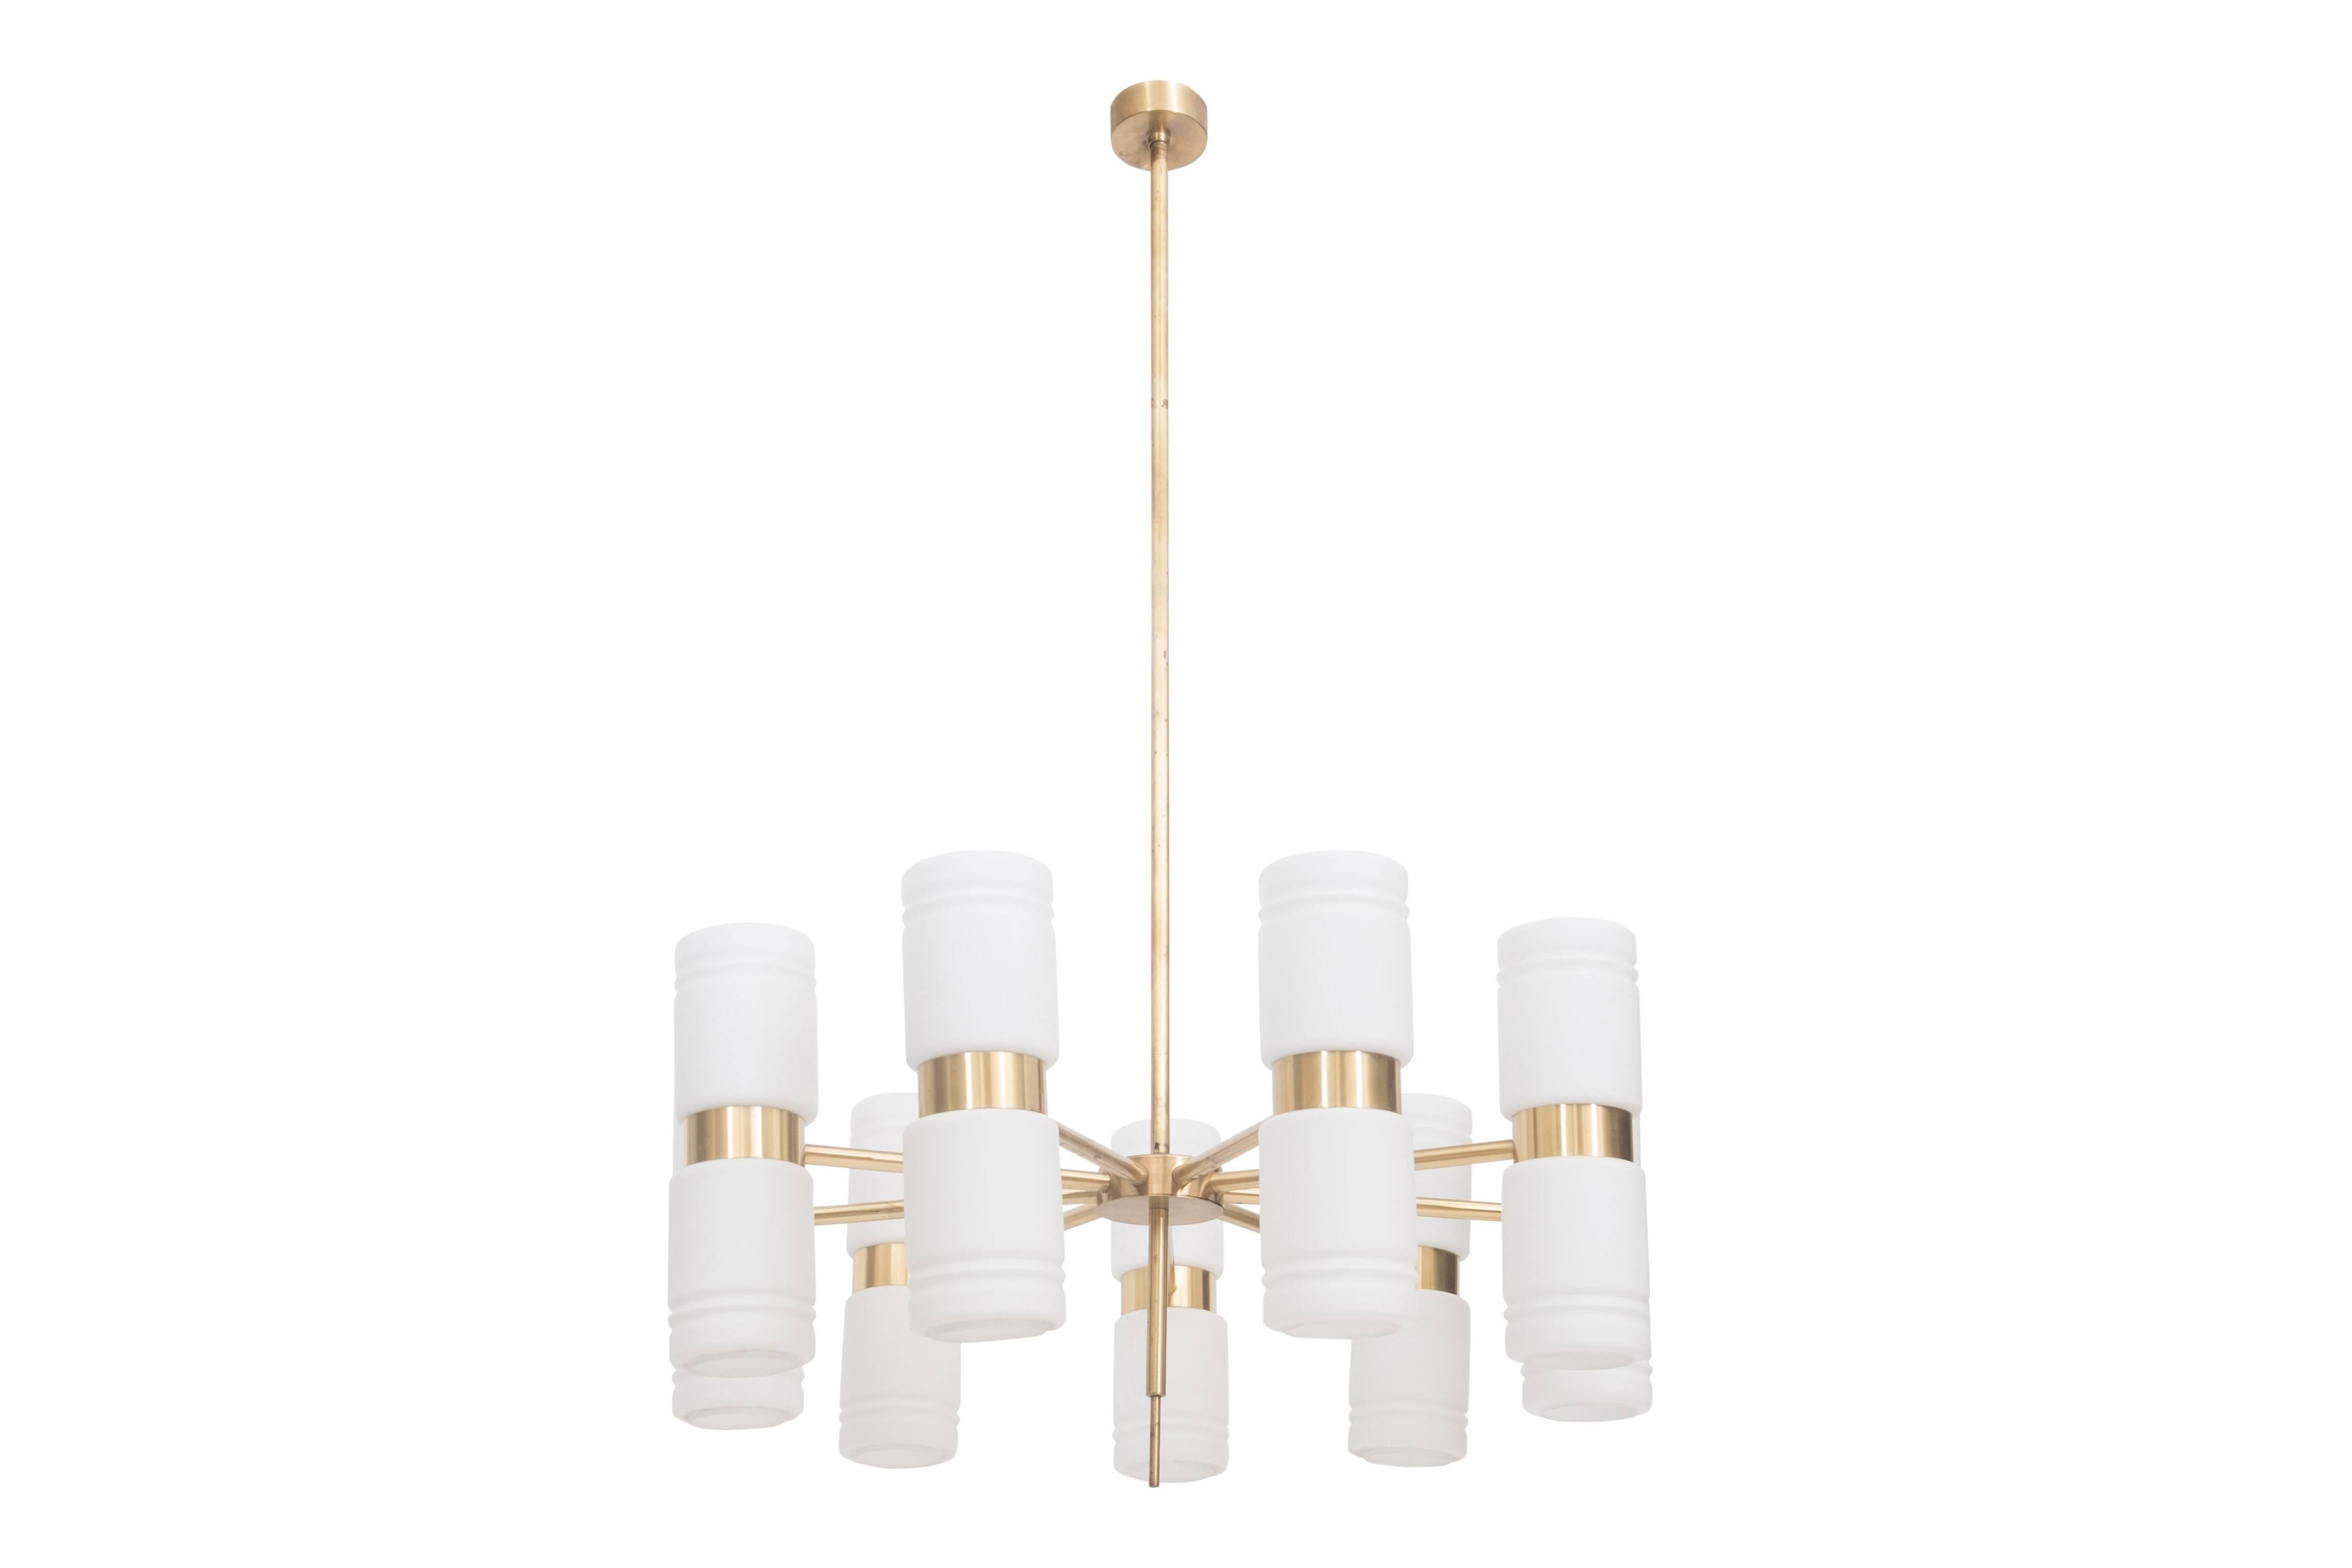 Midcentury brass and milky opaline glass chandelier by Hans Agne Jakobsson

We have 10 of these huge chandeliers available

They origin from the Musis Sacrum concert hall
We have a matching set of wall sconces in another listing

The opaline